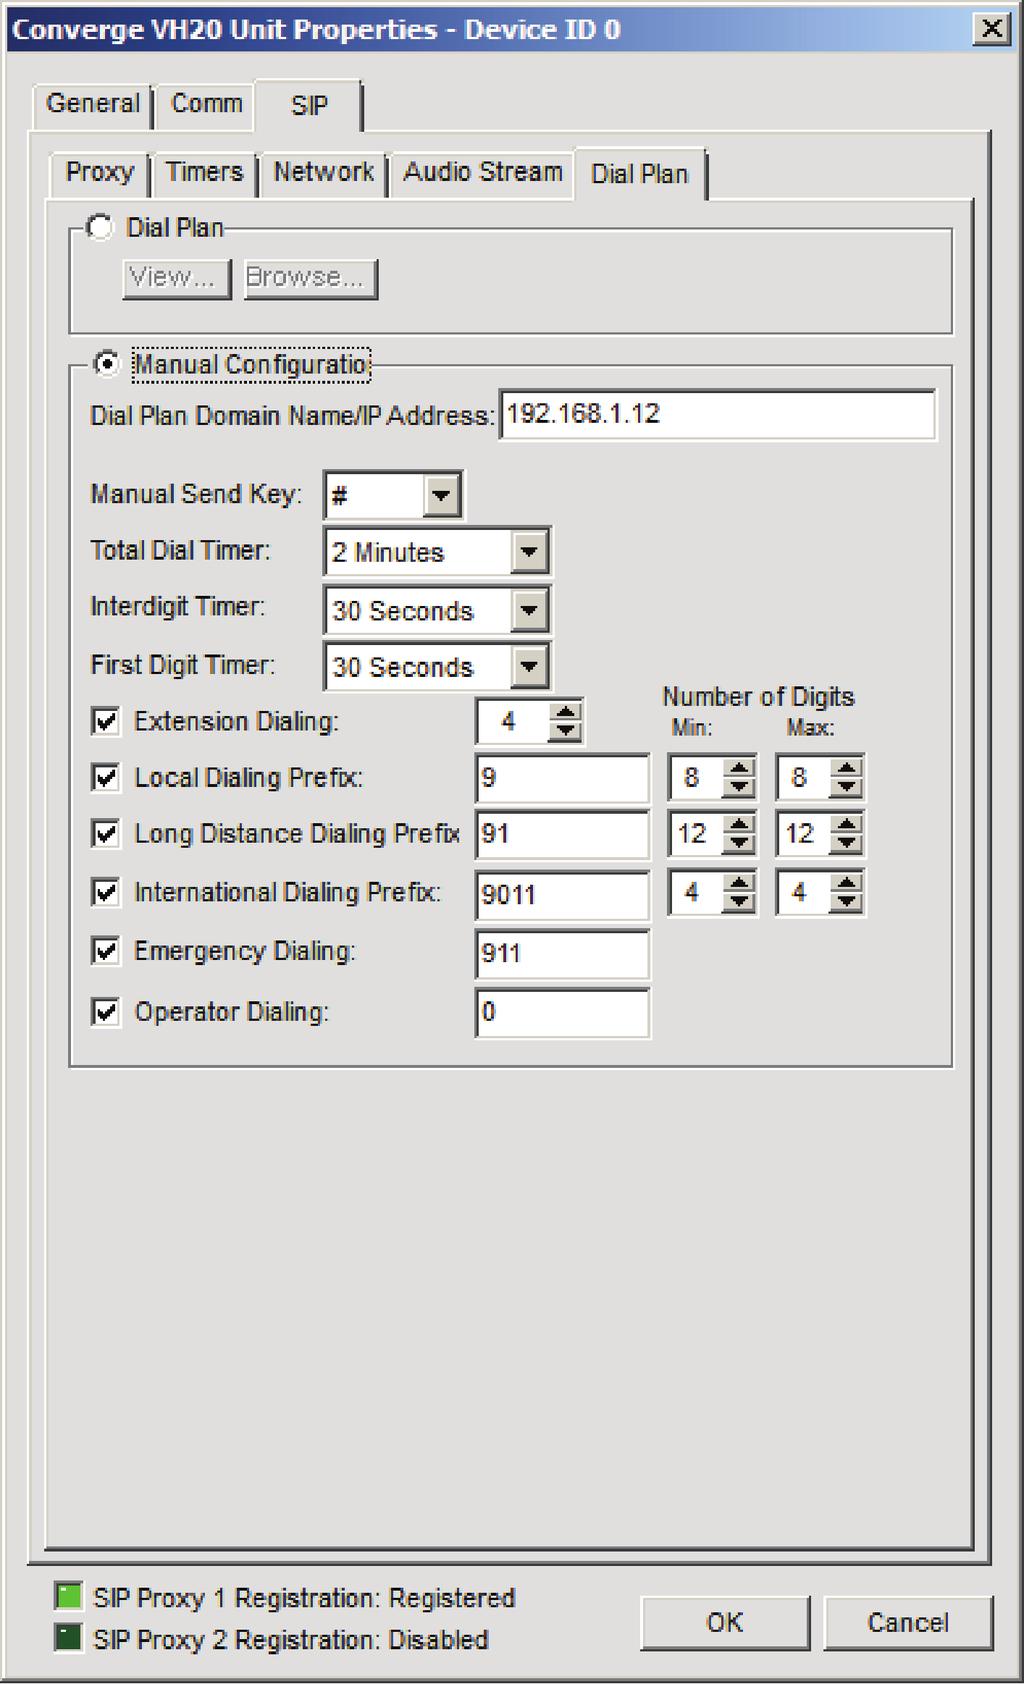 In the Dial Plan tab, confirm that extension dialing is set correctly for the extension length setup in the Call Manager.